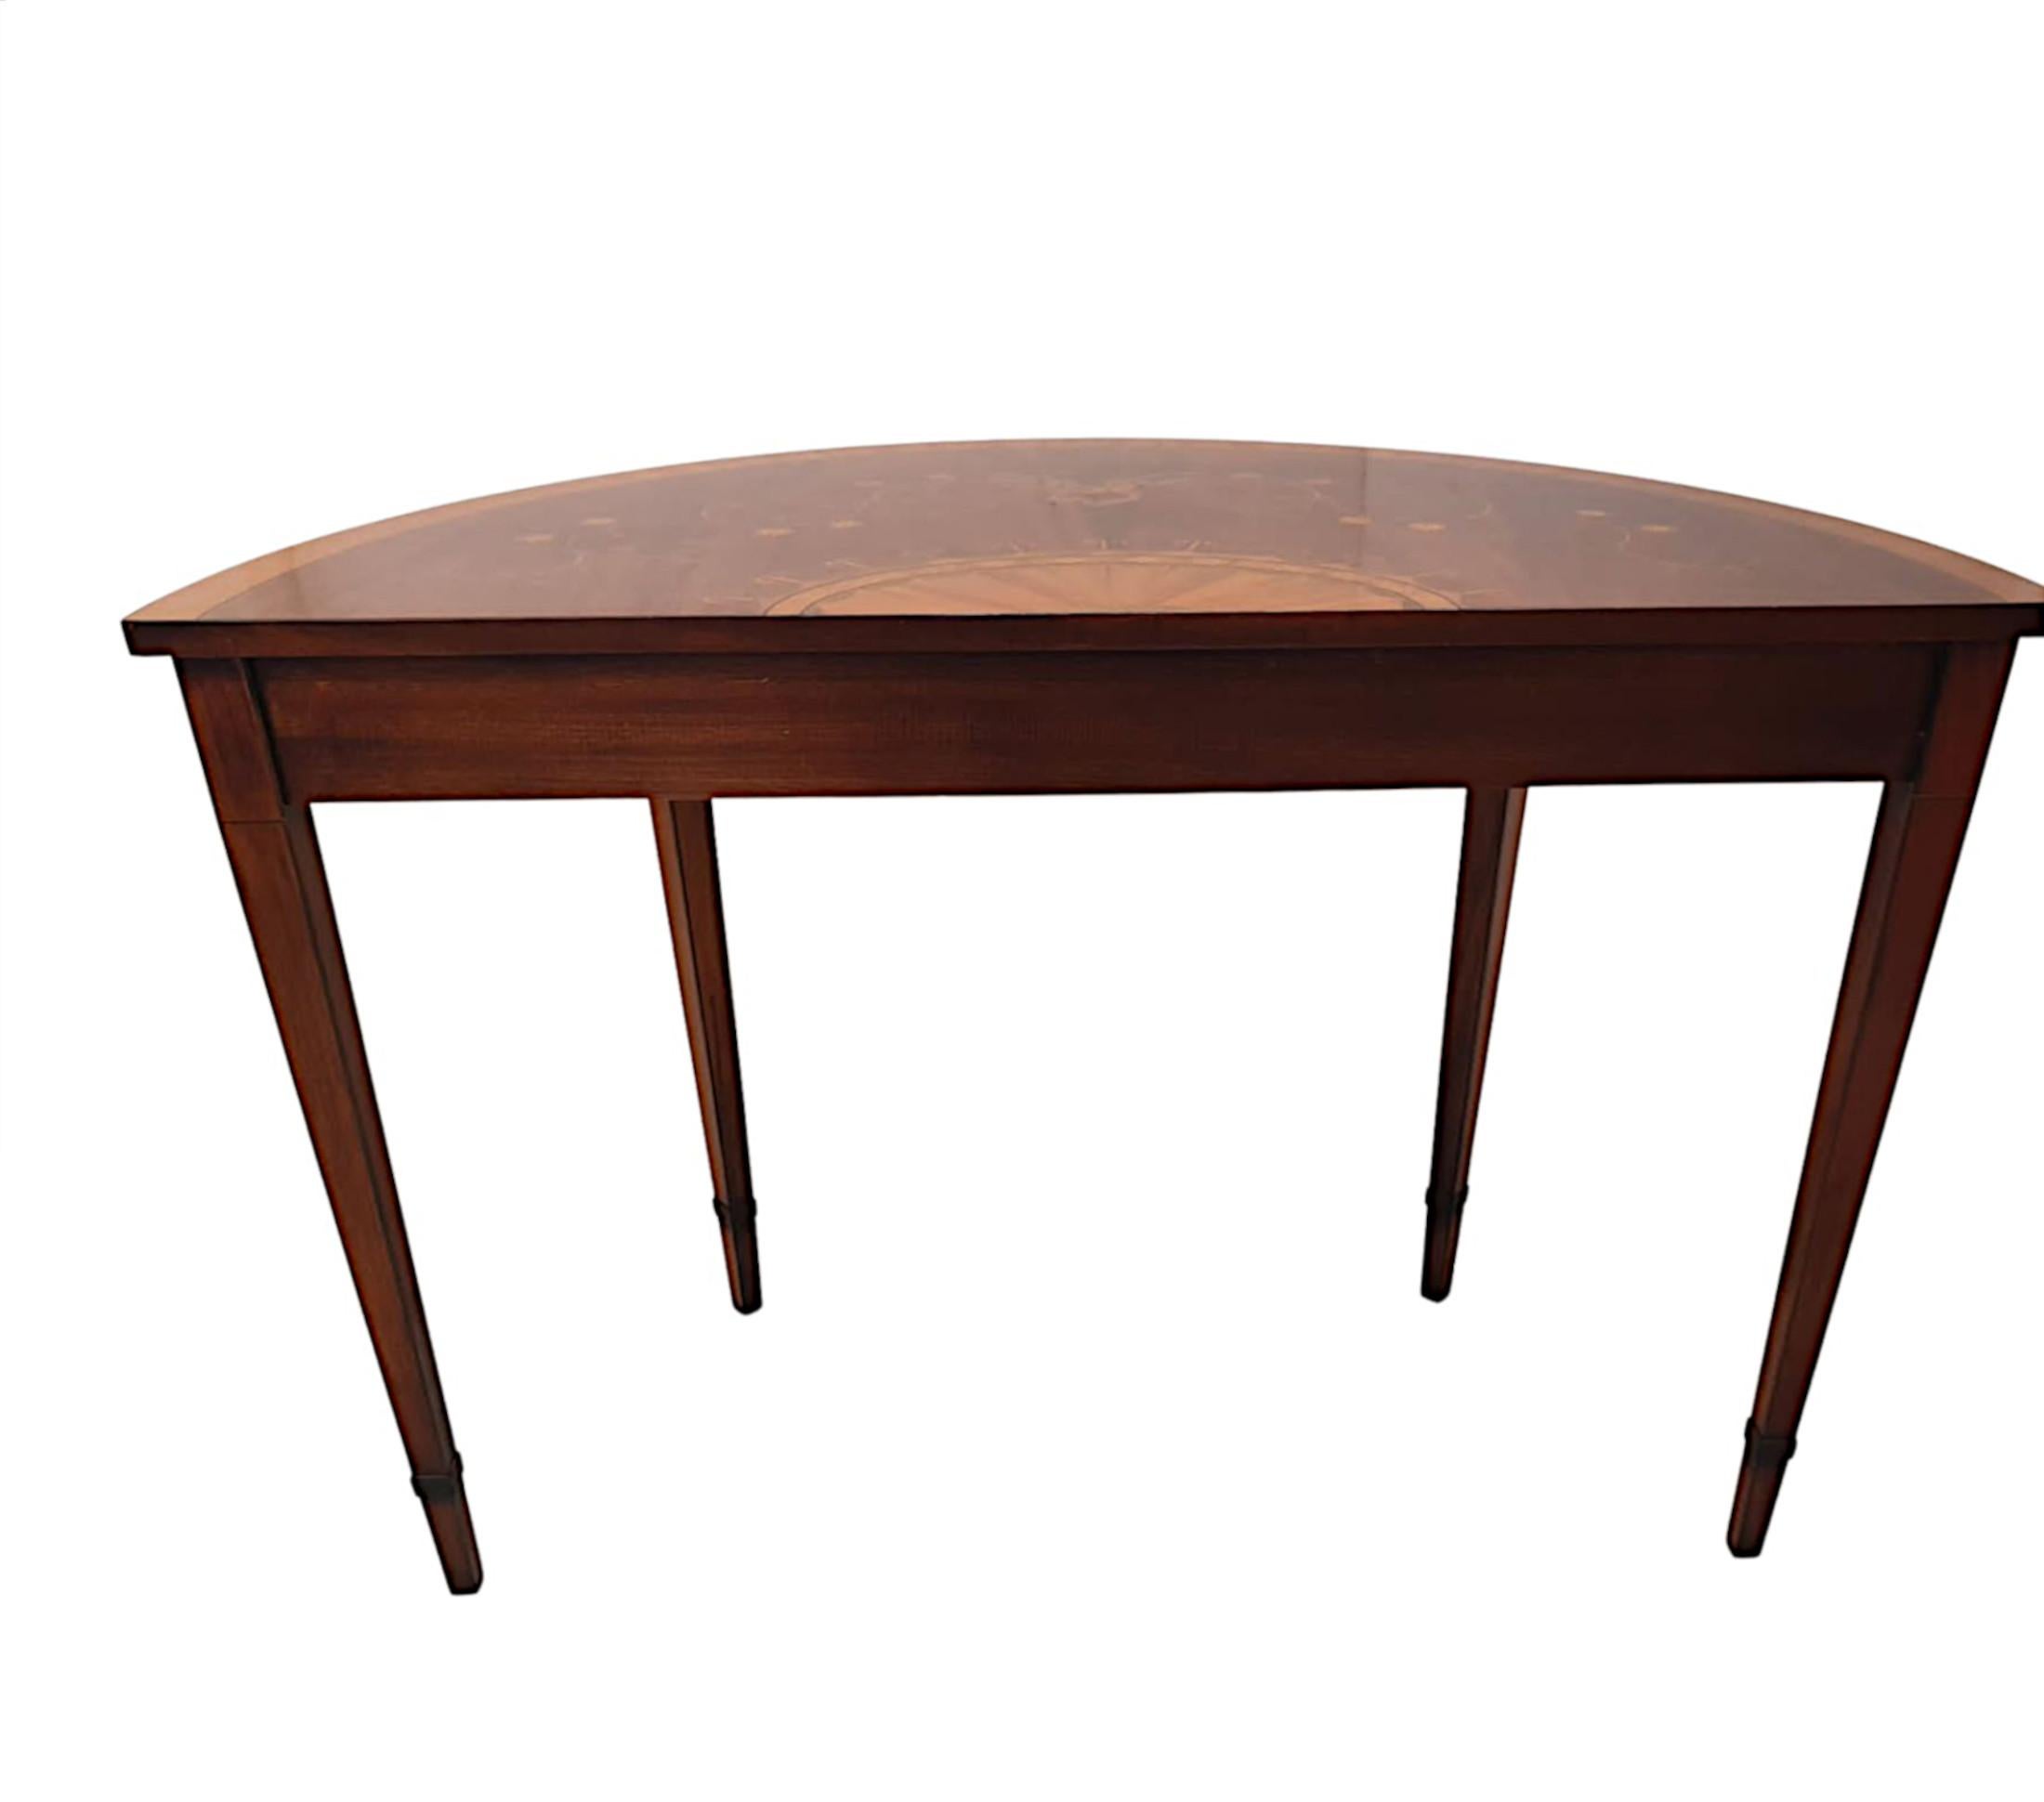 Mahogany Fabulous Mid-20th Century Inlaid Demi Lune Table For Sale